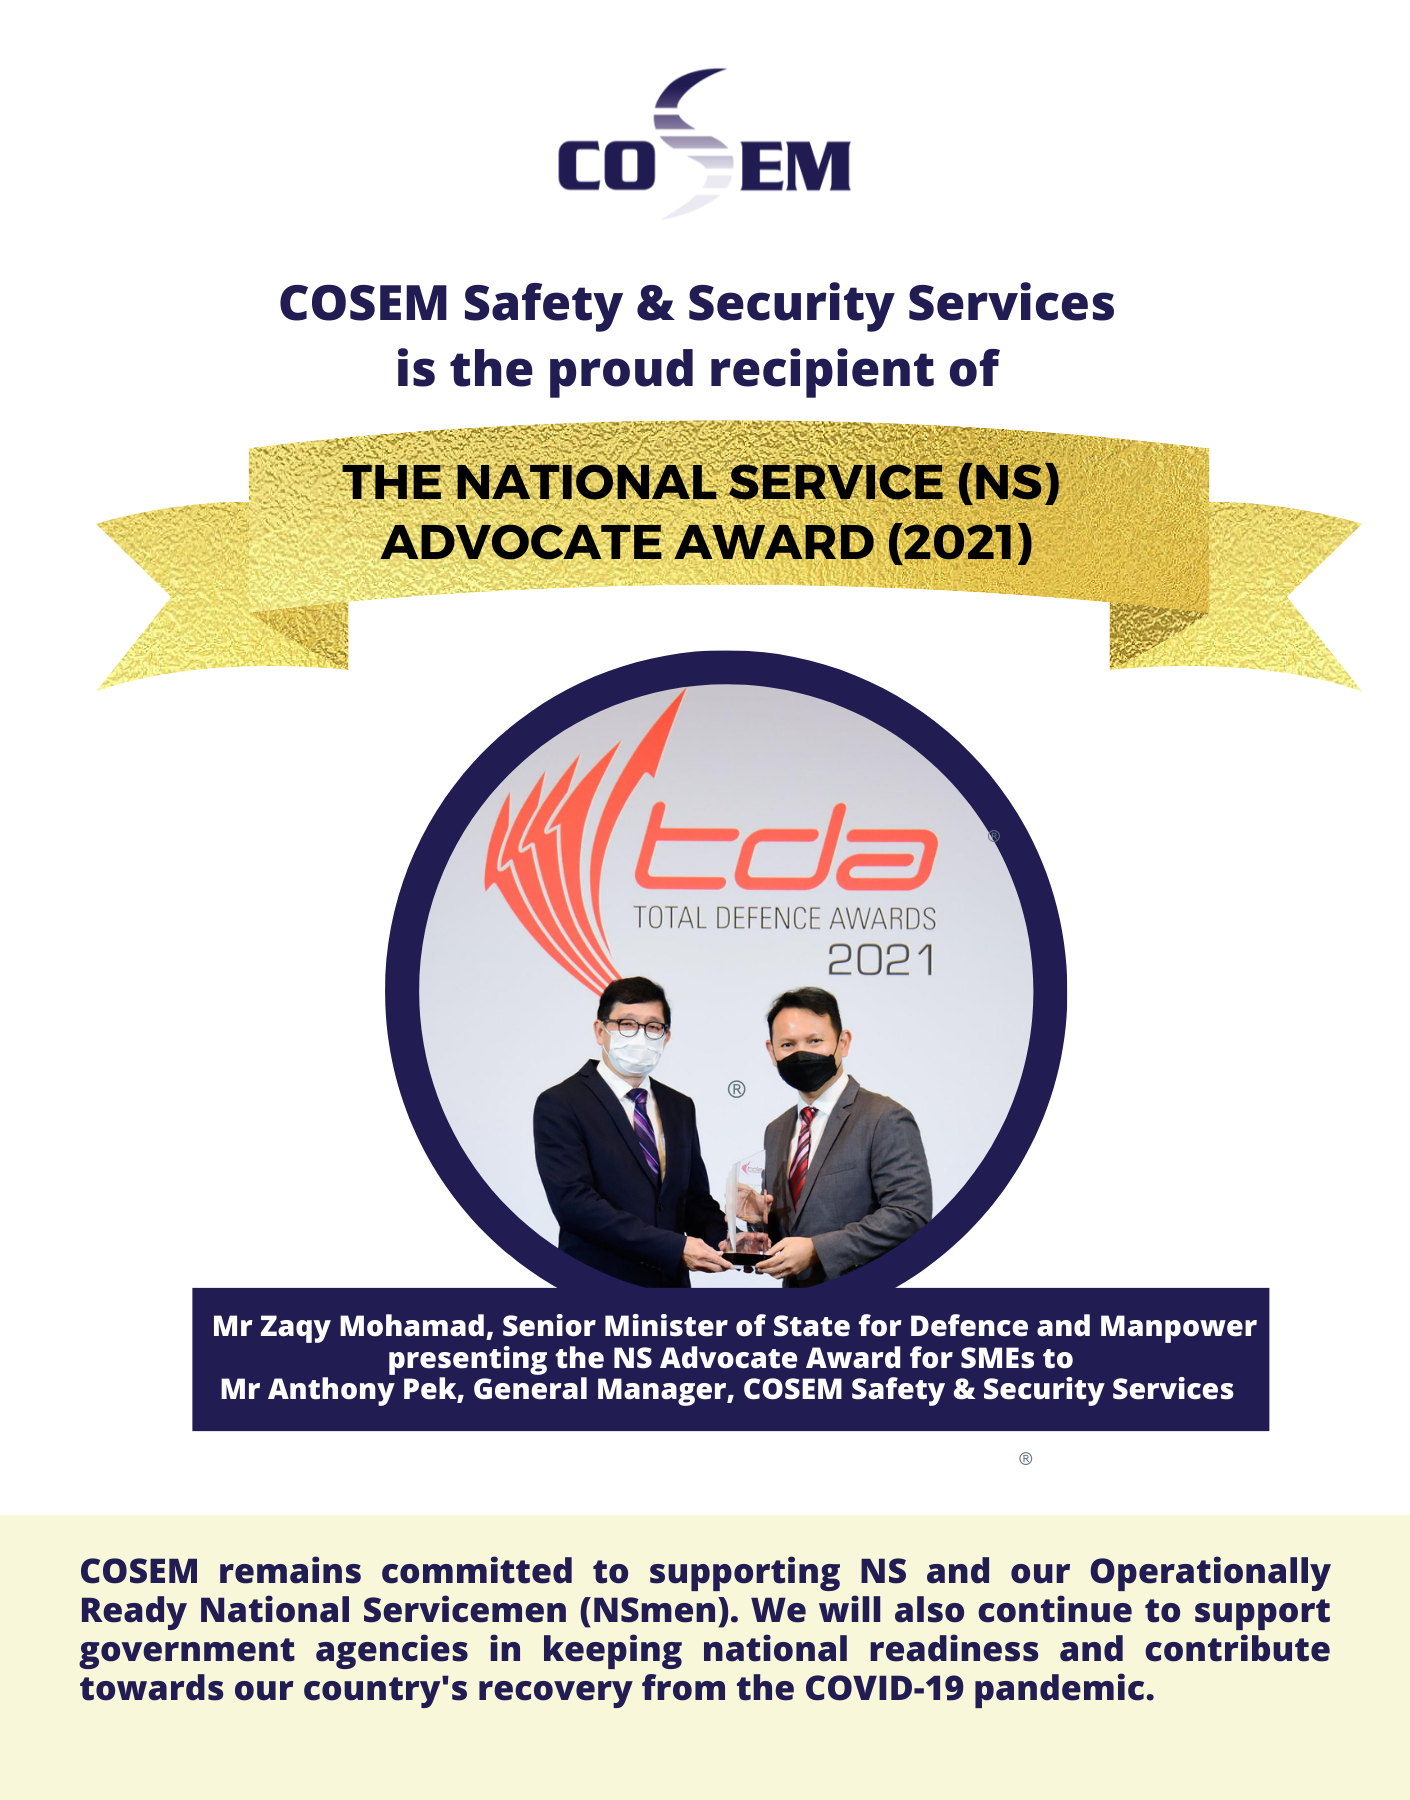 COSEM Safety & Security Services has been conferred the prestigious National Service (NS) Advocate Award (2021) 